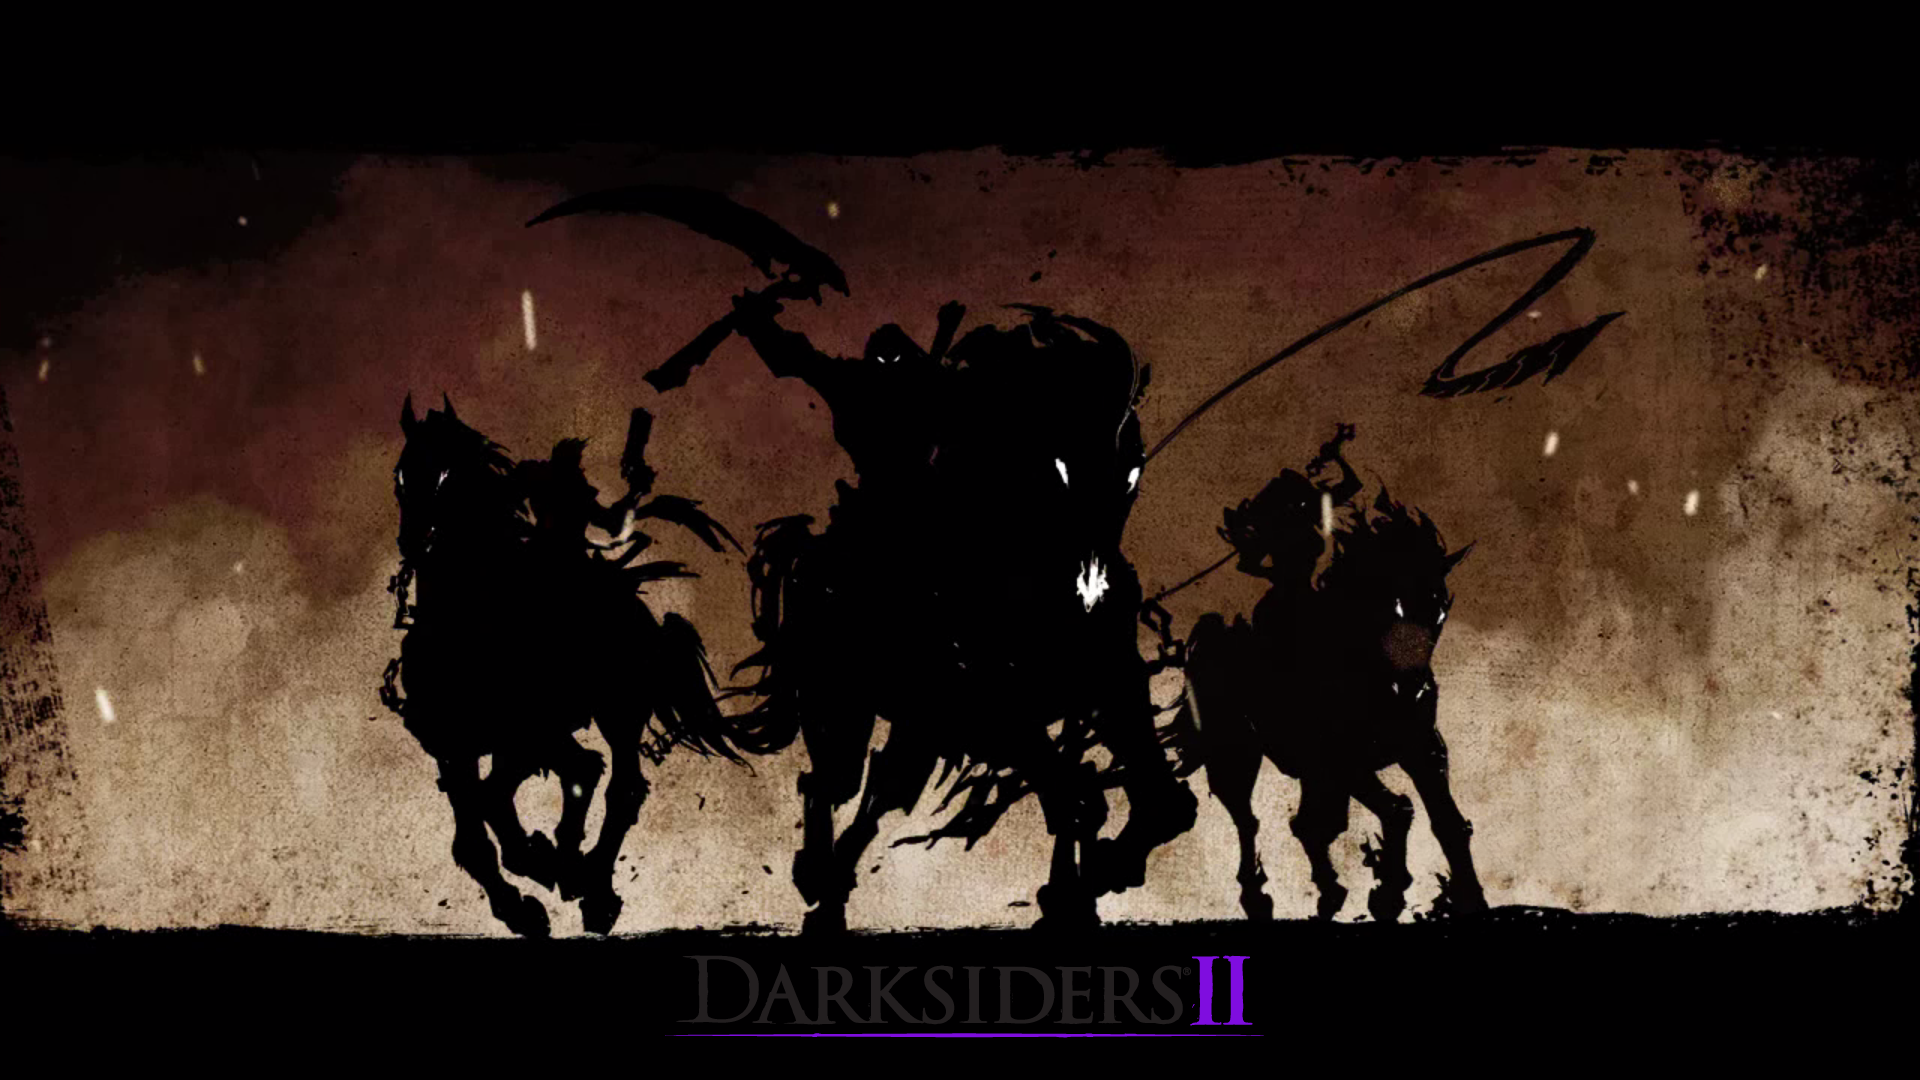 52 Darksiders HD Wallpapers | Backgrounds - Wallpaper Abyss - Page 2